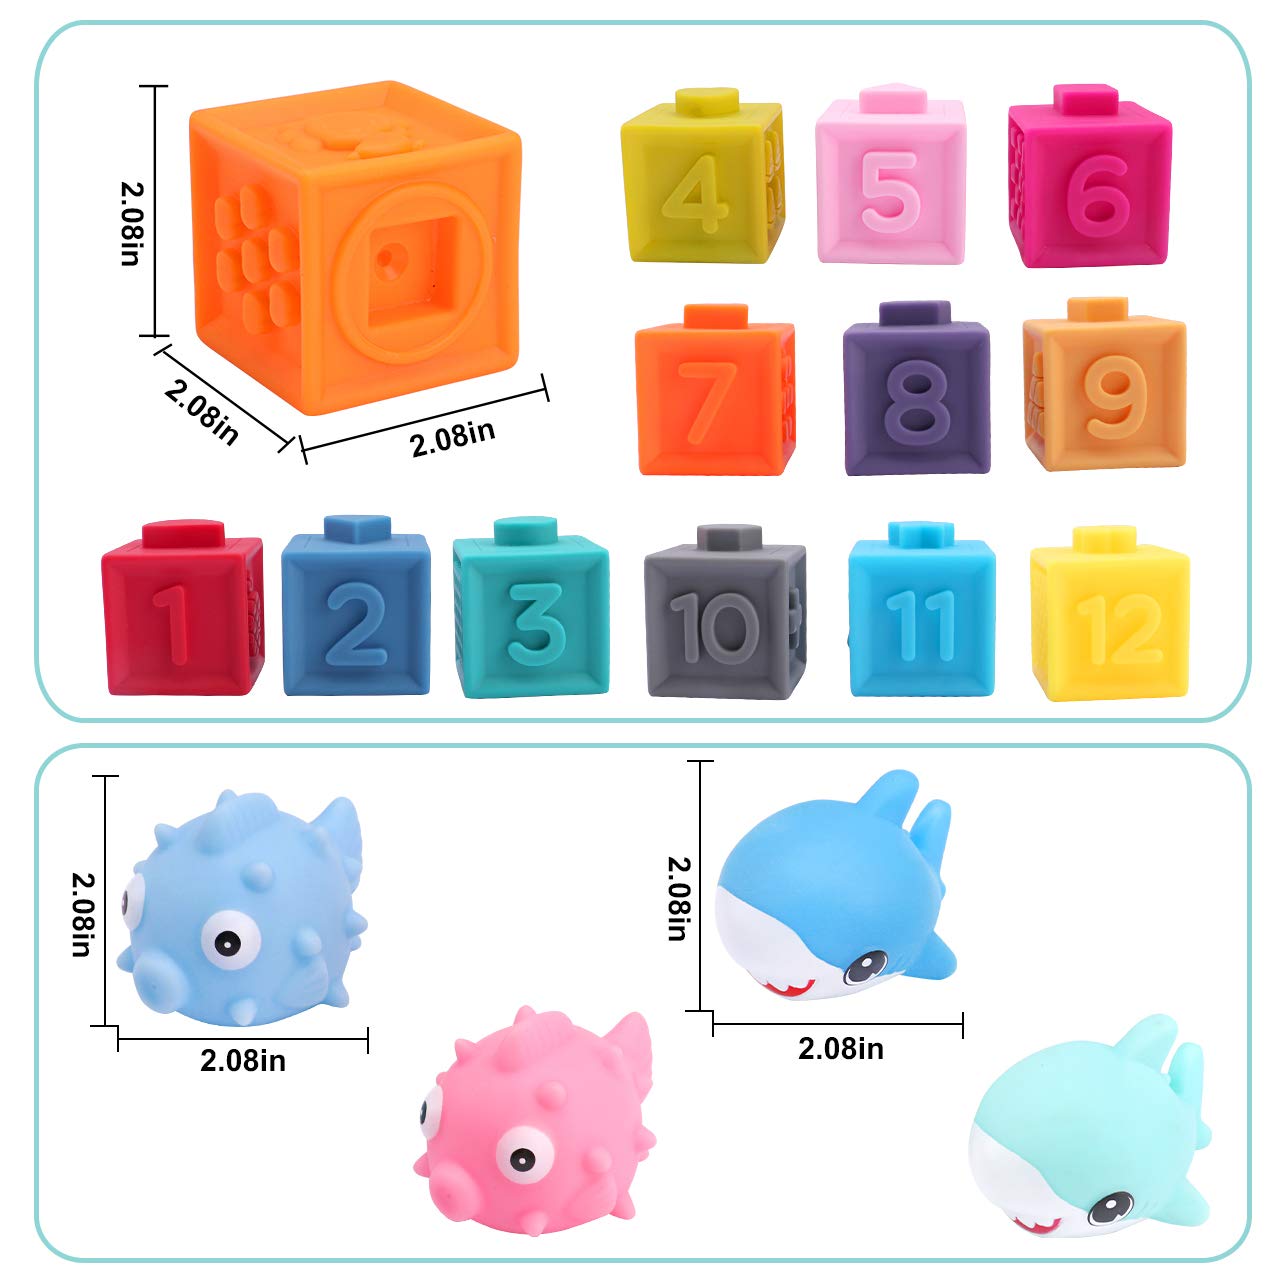 OWNONE 1 Baby Soft Blocks, 16PCS Stacking Building Blocks, Teething & Squeezing Toys for Babies, Cube Blocks with Numbers Animals Fruits, Soft Toys for Babies Infants Toddlers Age 6 to 12 Months Up